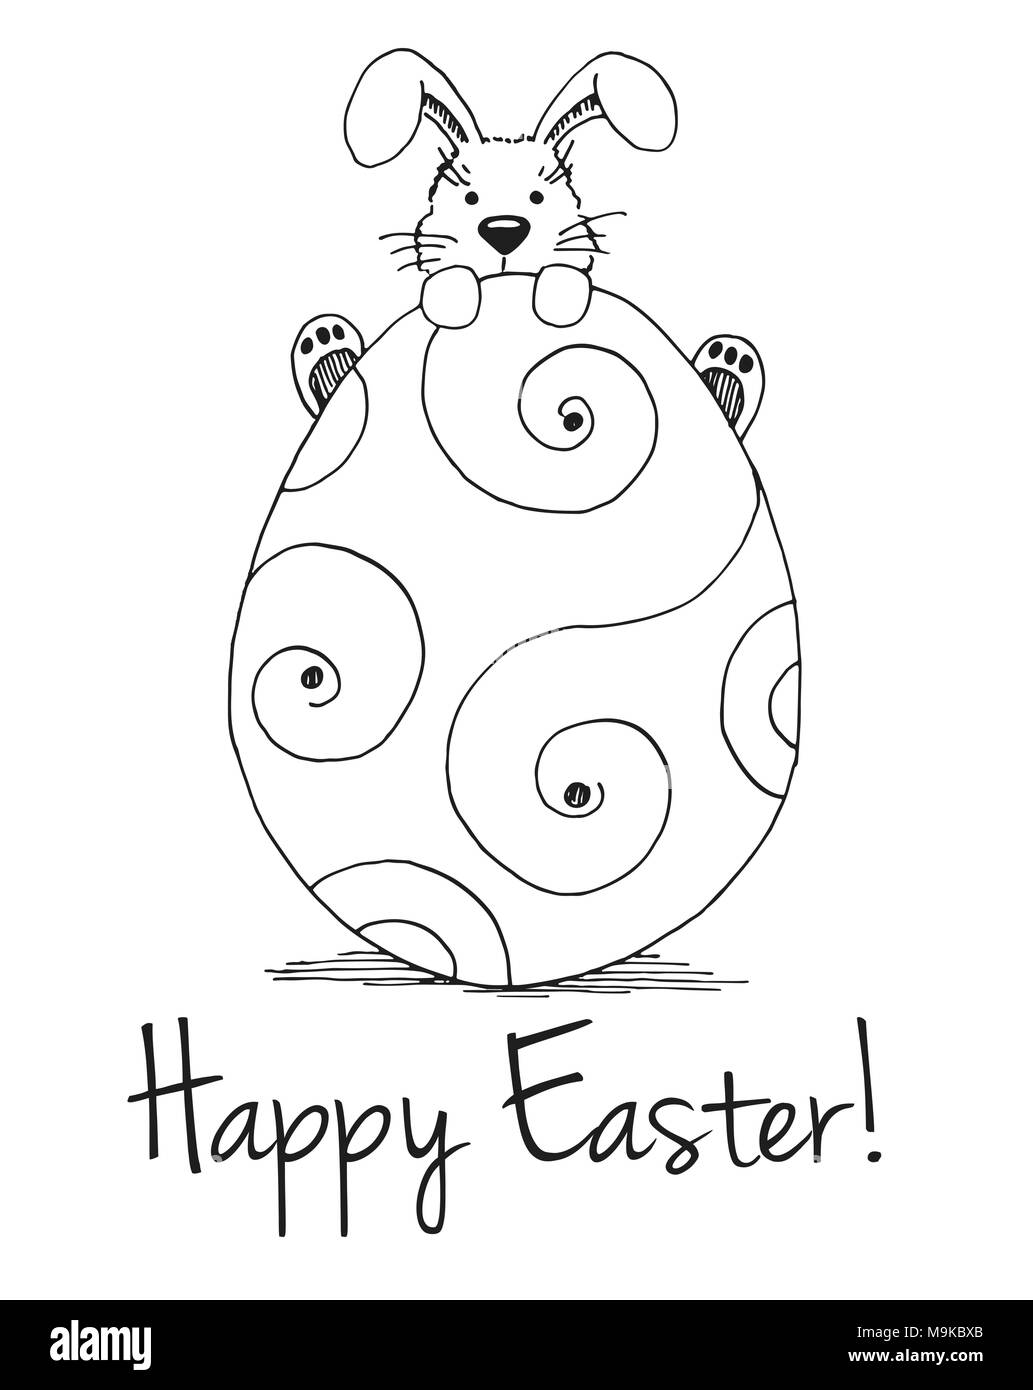 Hand draw happy easter text Royalty Free Vector Image